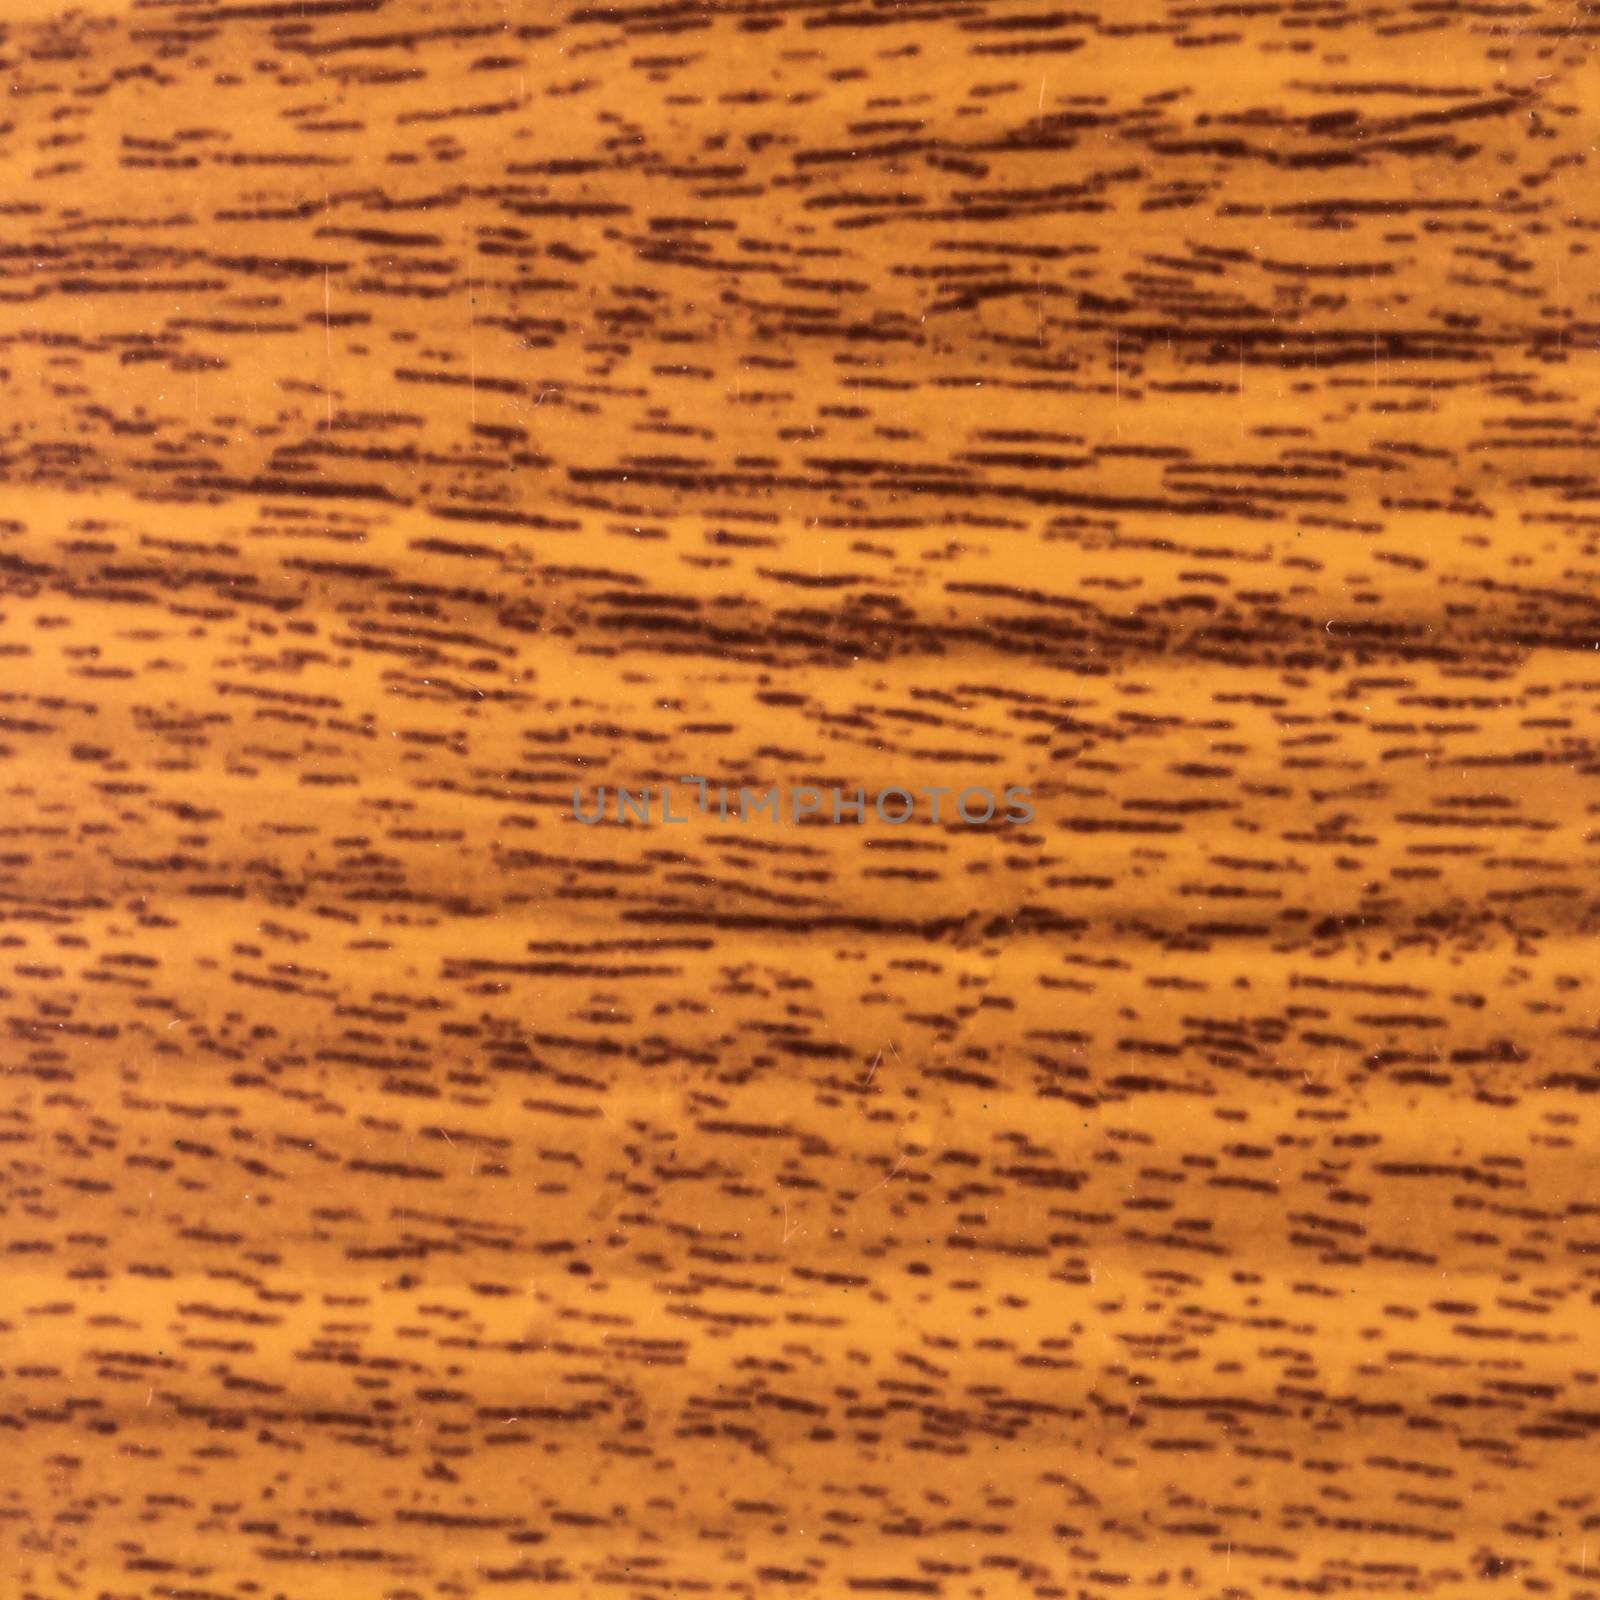 Abstract wood texture with focus on the wood's grain. Chestnut wood